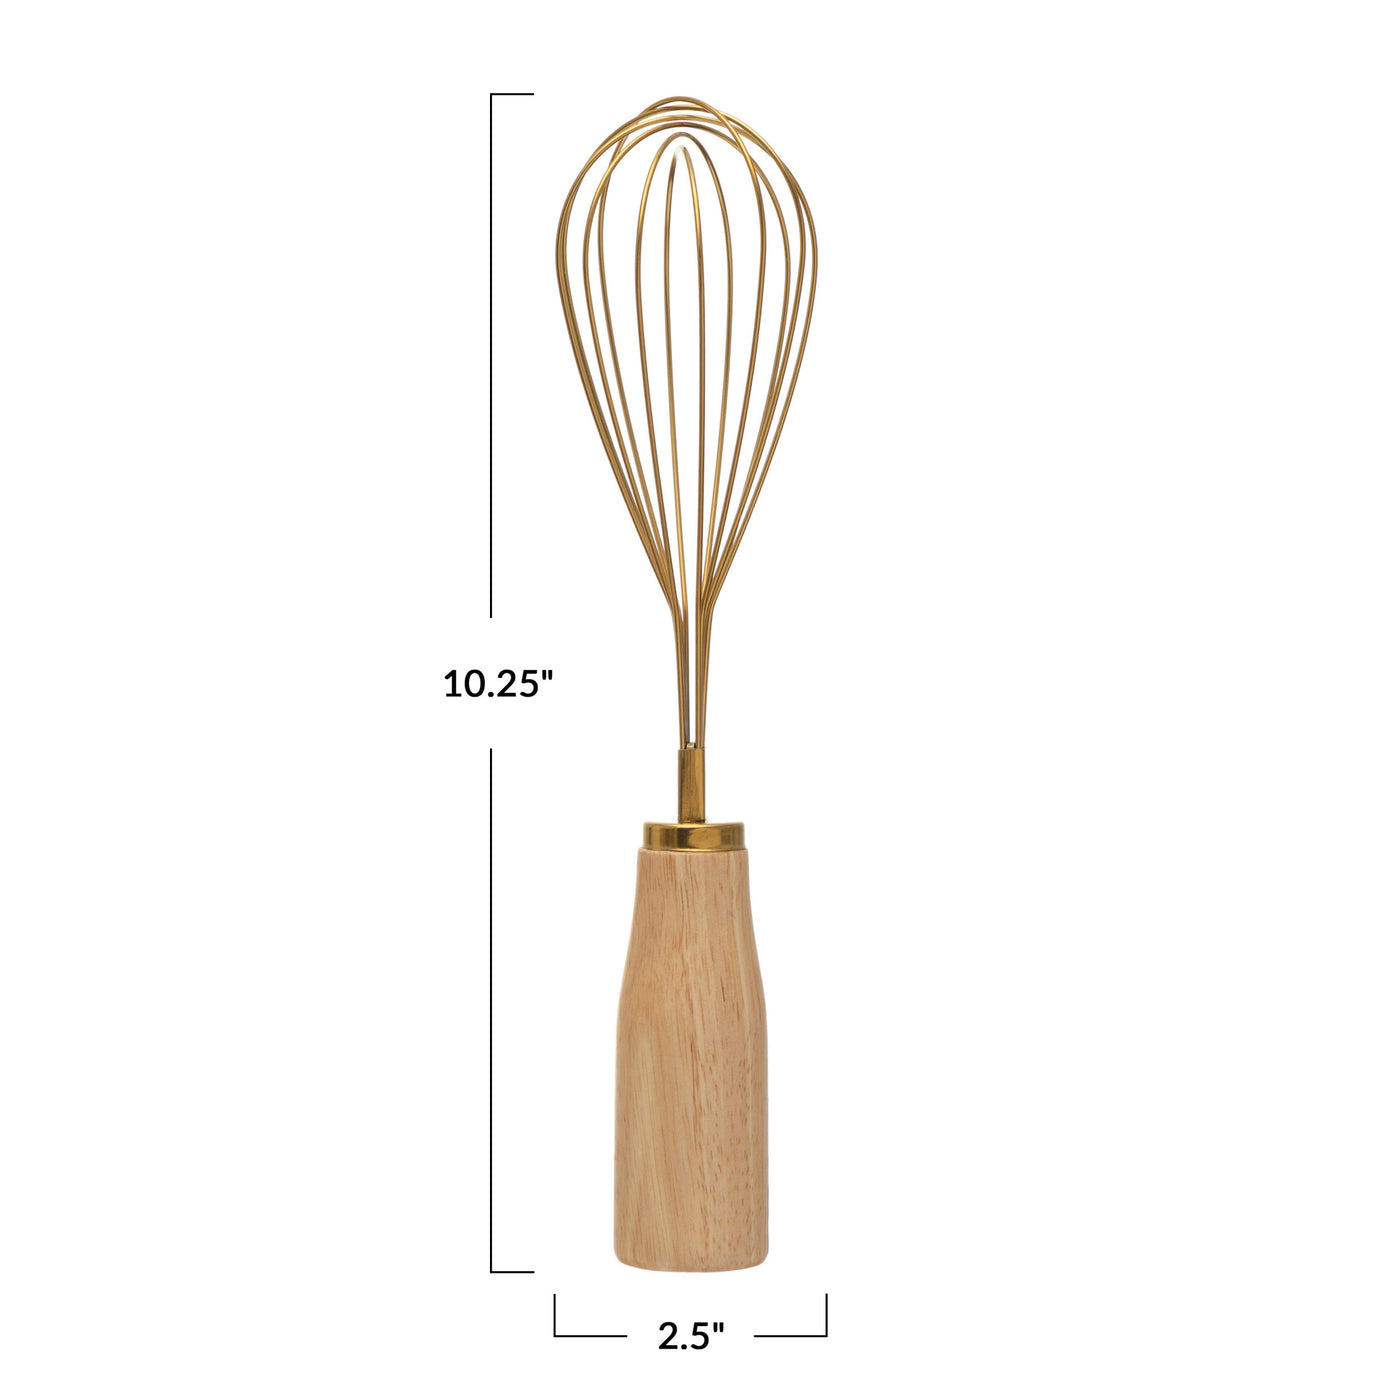 Stainless Steel Whisk with Wood Handle, Gold